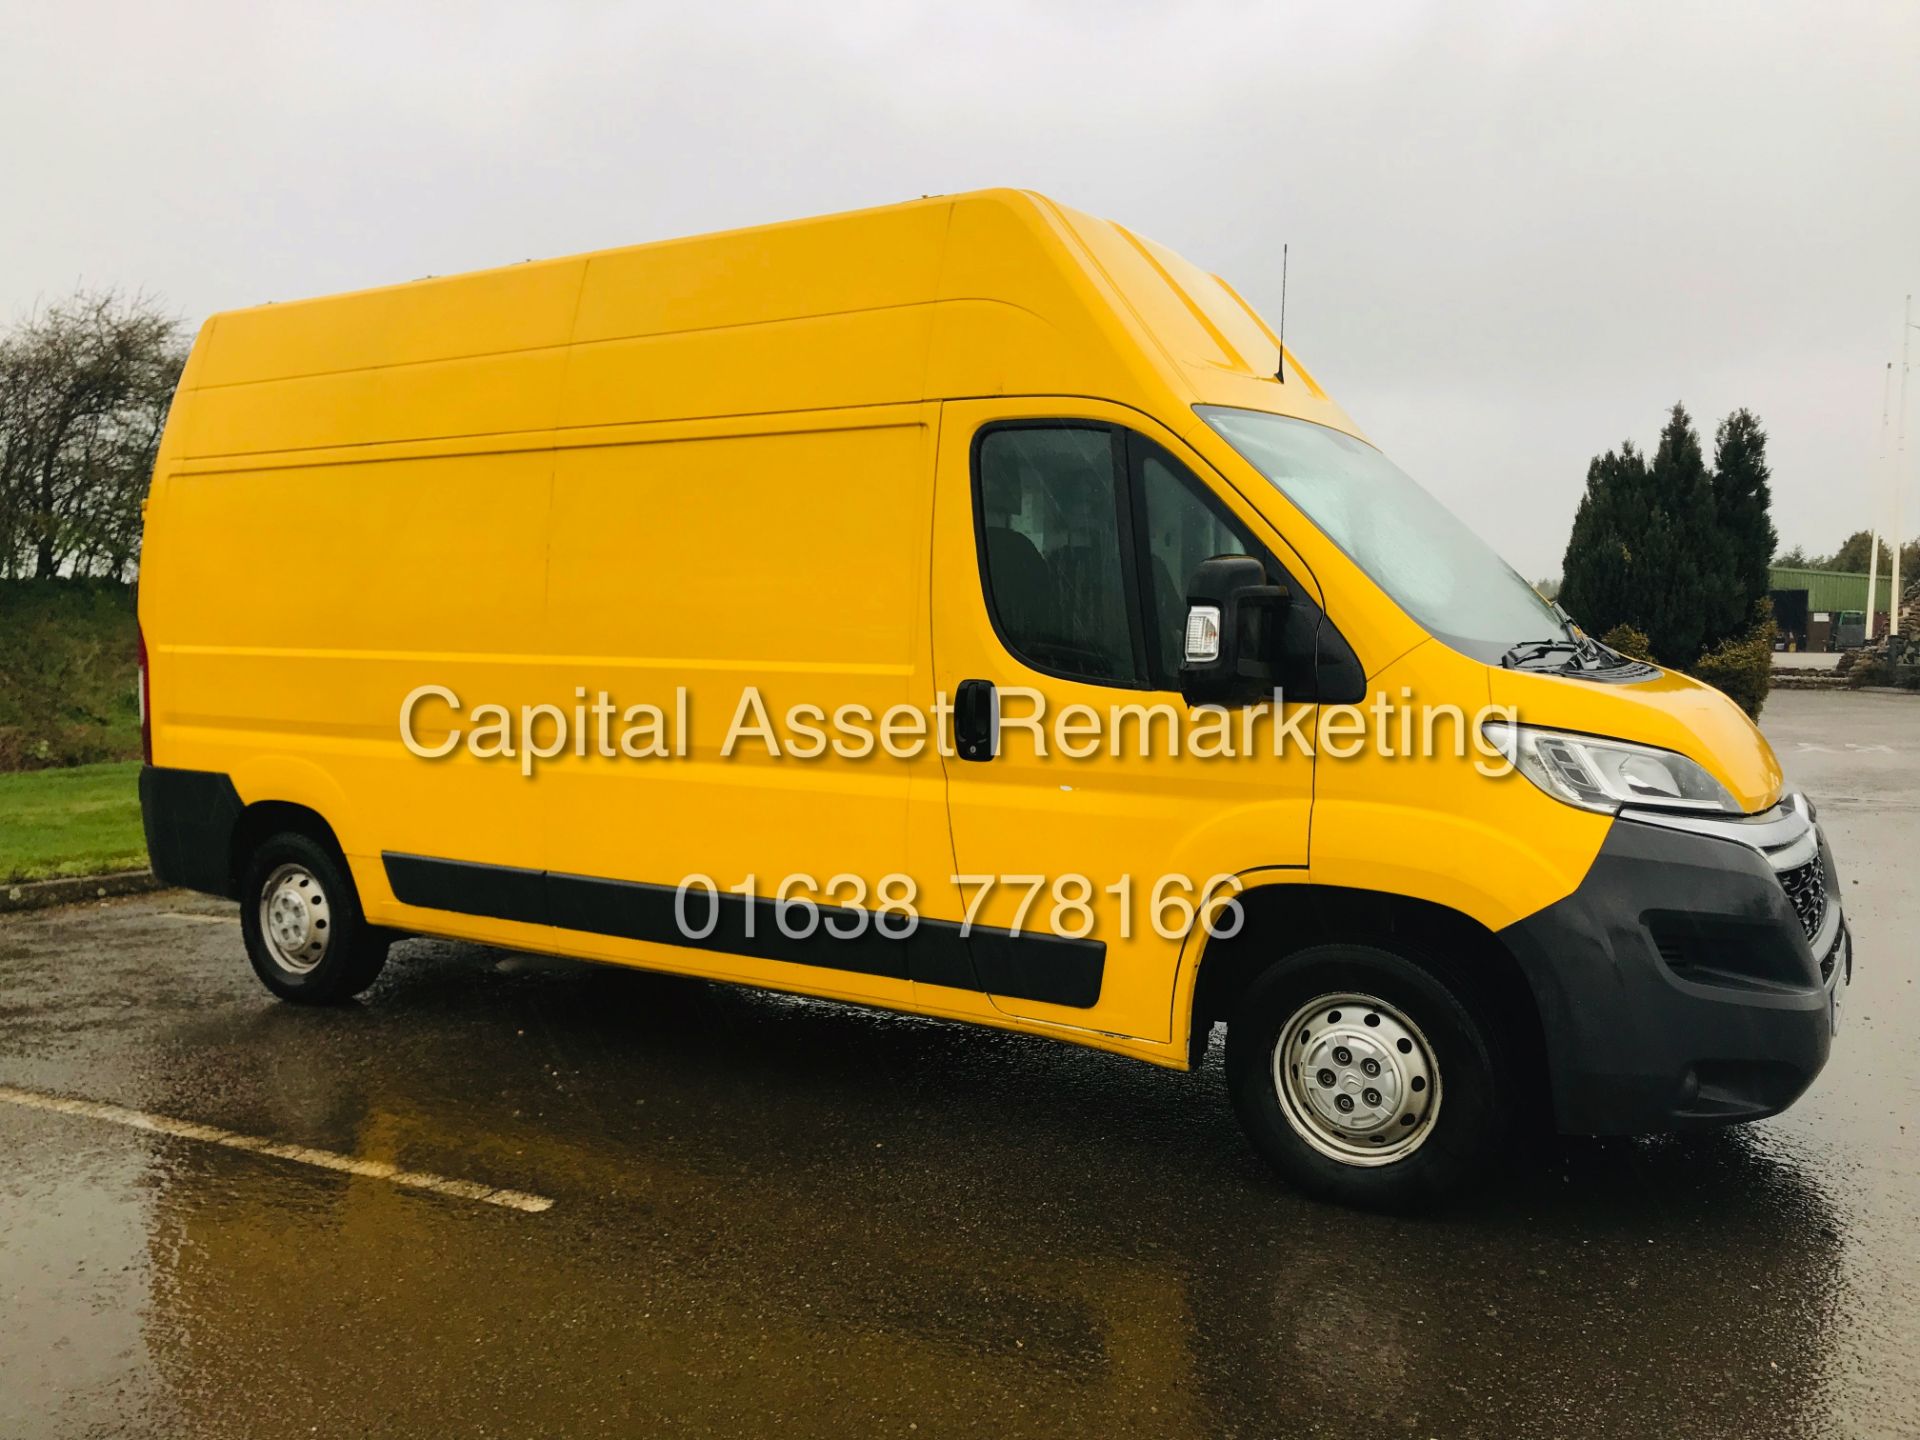 On Sale CITROEN RELAY 2.2HDI L3H3 "130BHP - 6 SPEED" (2015) 1 OWNER -ONLY 38,000 MILES IDEAL CAMPER